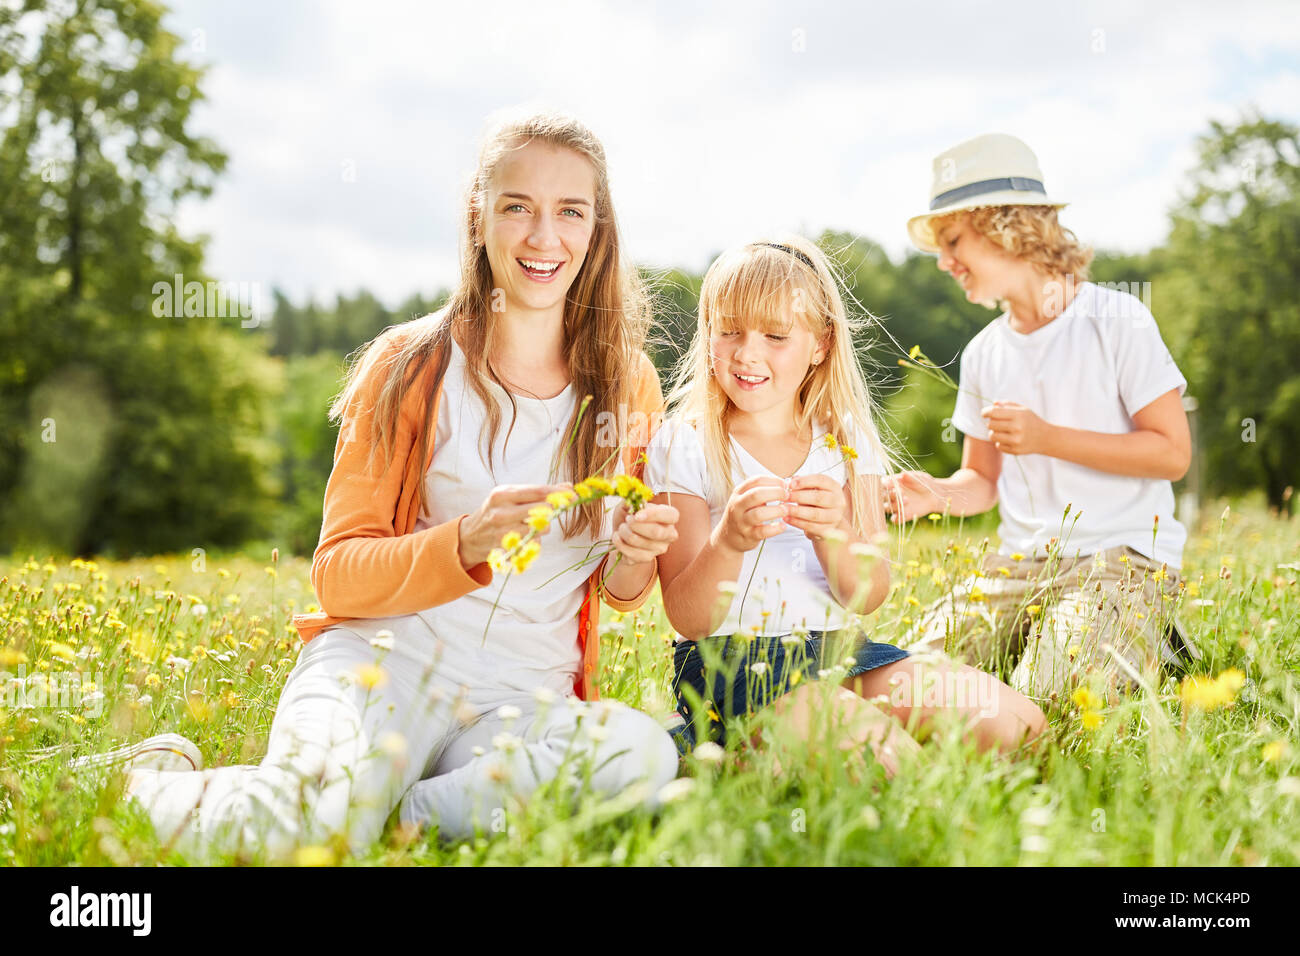 Mother and two children collect flowers together in the garden in summer Stock Photo